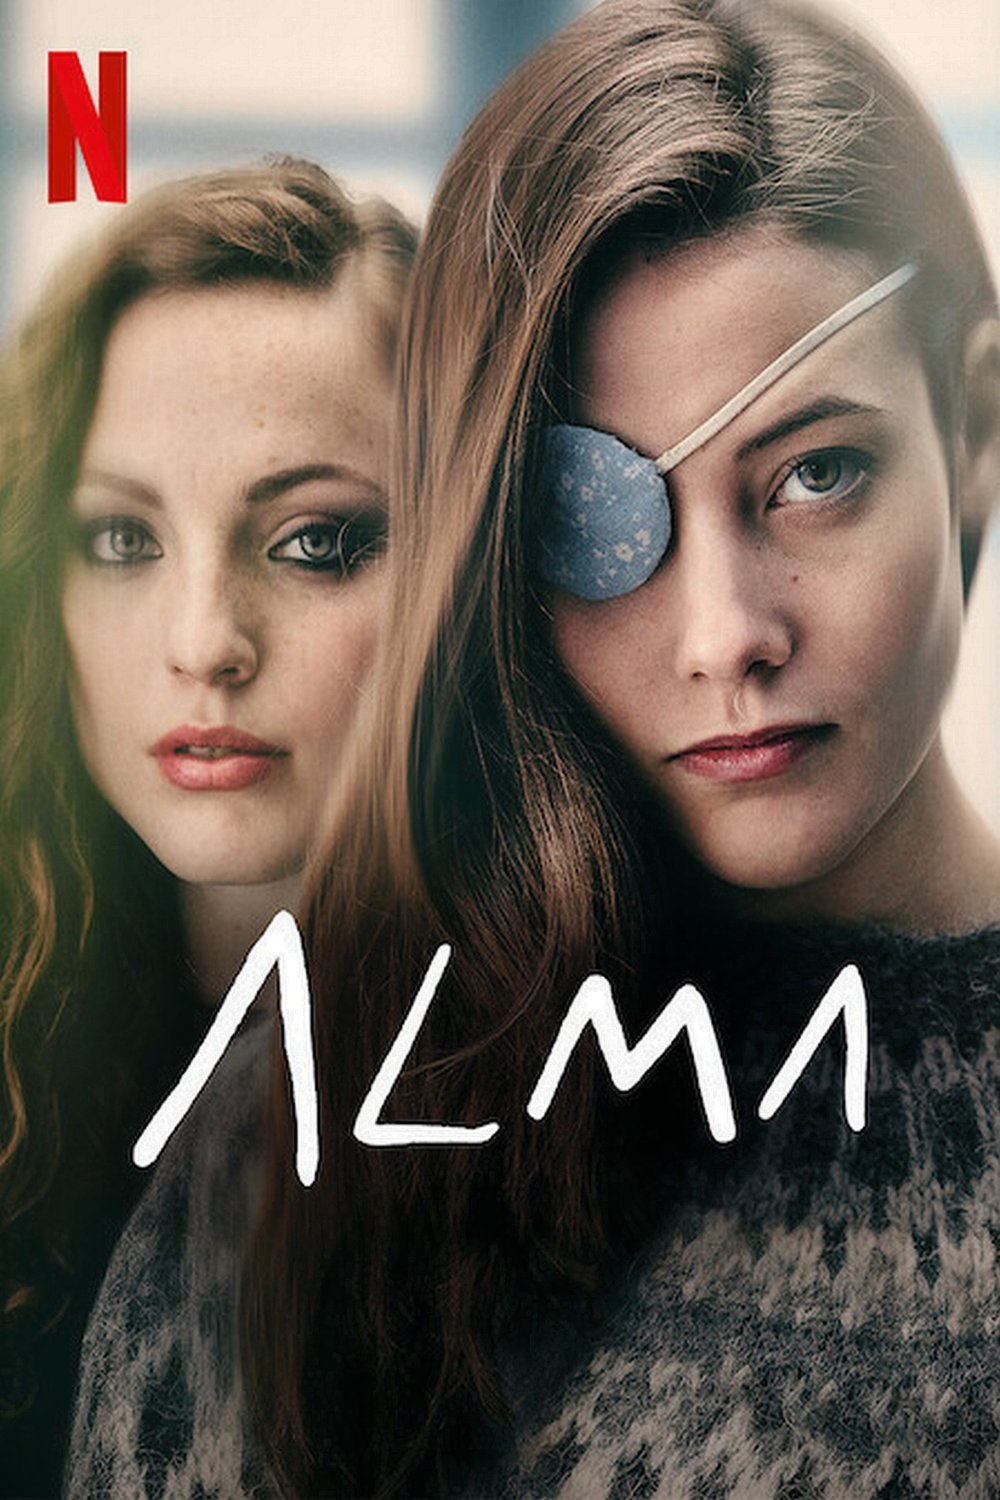 Spanish poster of the movie Alma